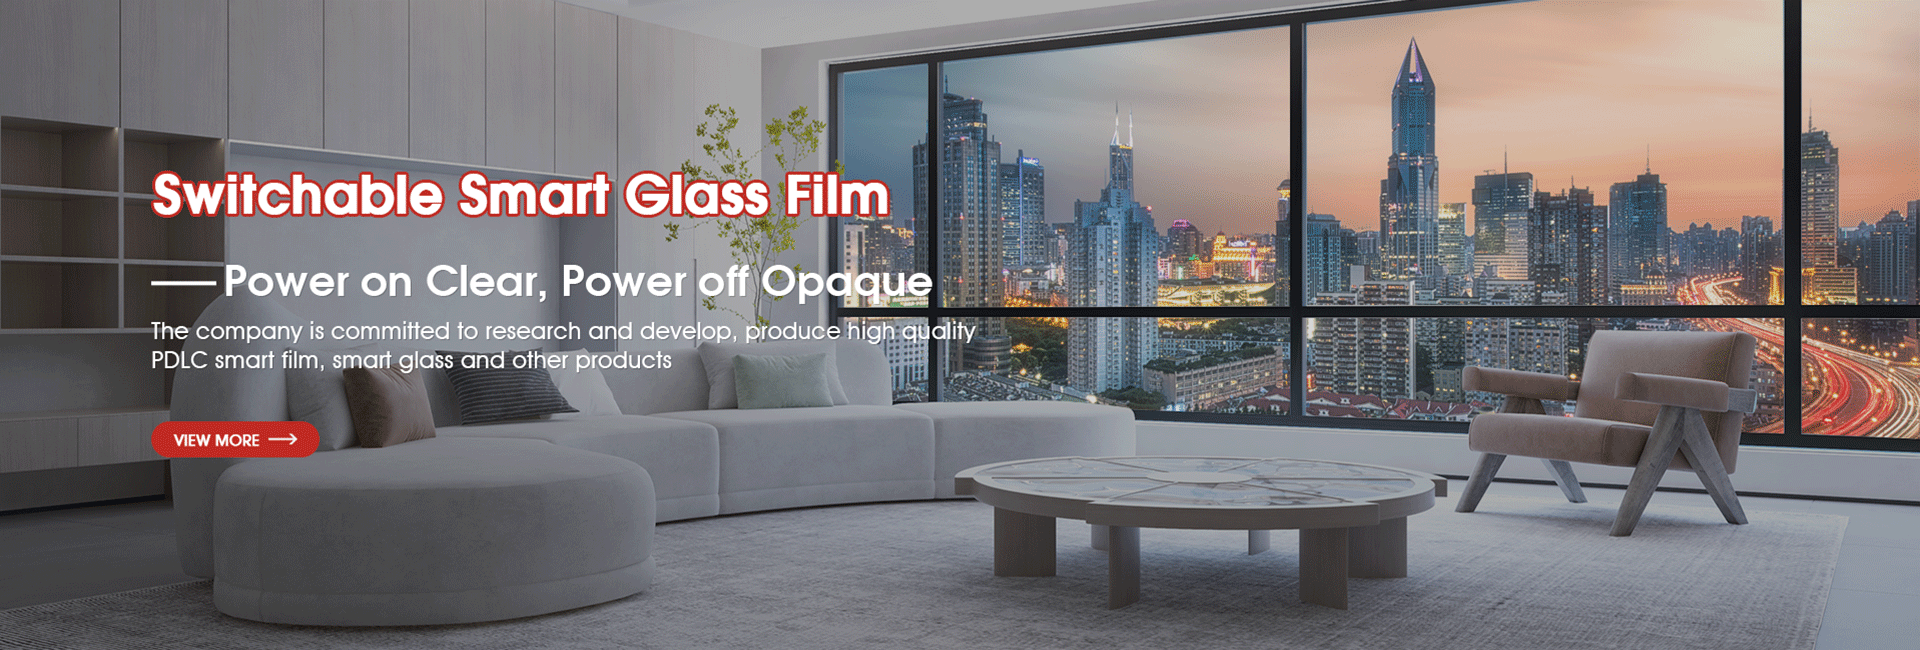 SWITCHABLE SMART GLASS AND FILM